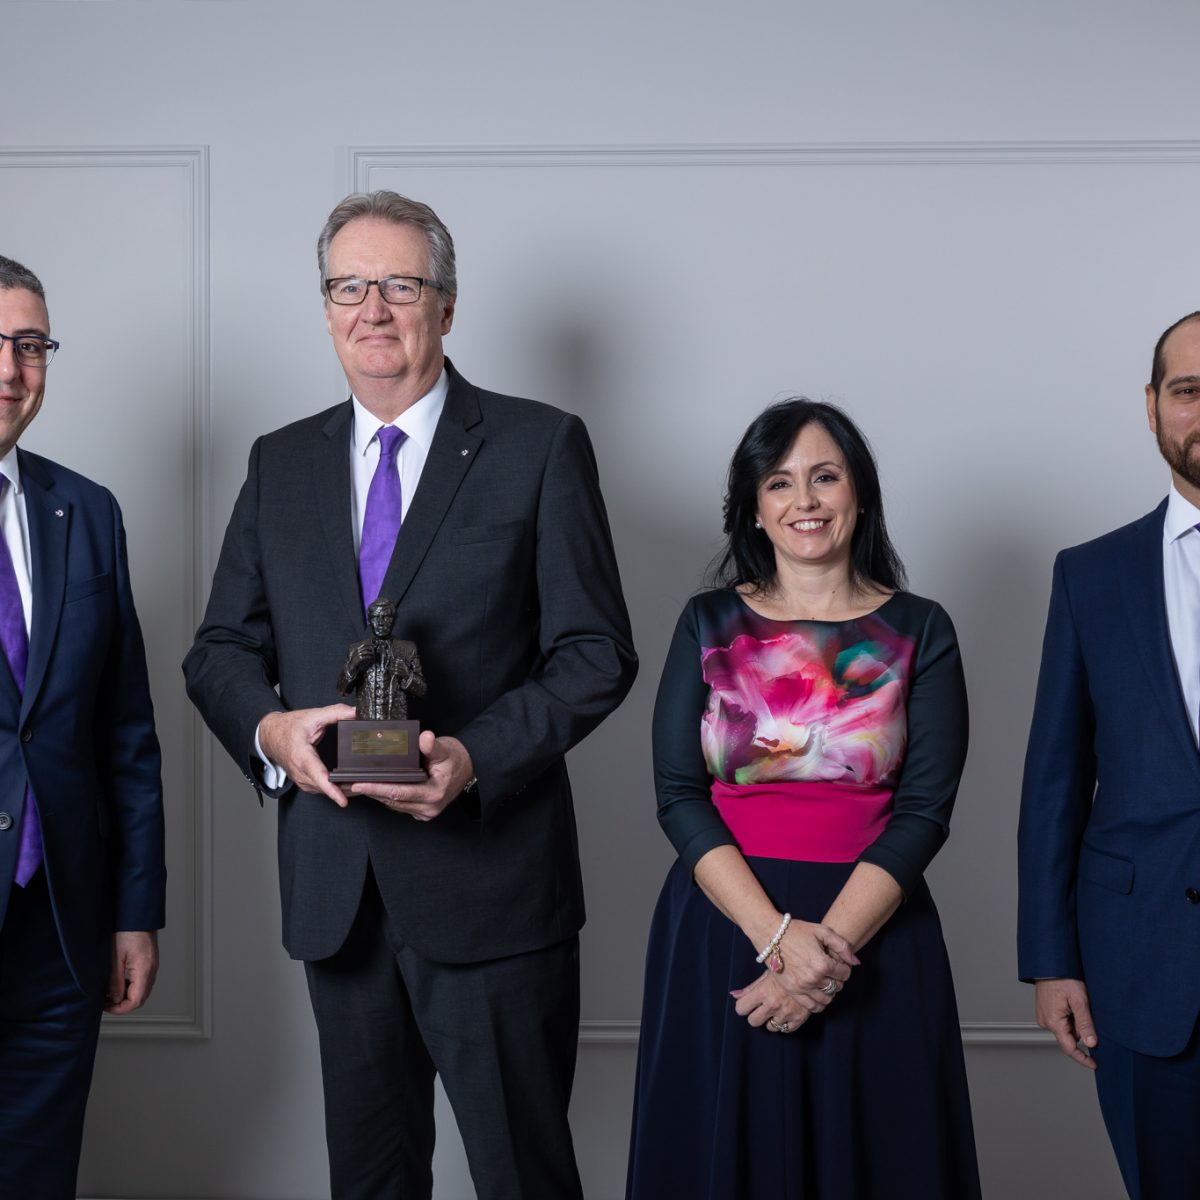 BNF Bank wins again The Banker, ‘Bank of the Year 2021’ Award for 2nd Consecutive Year